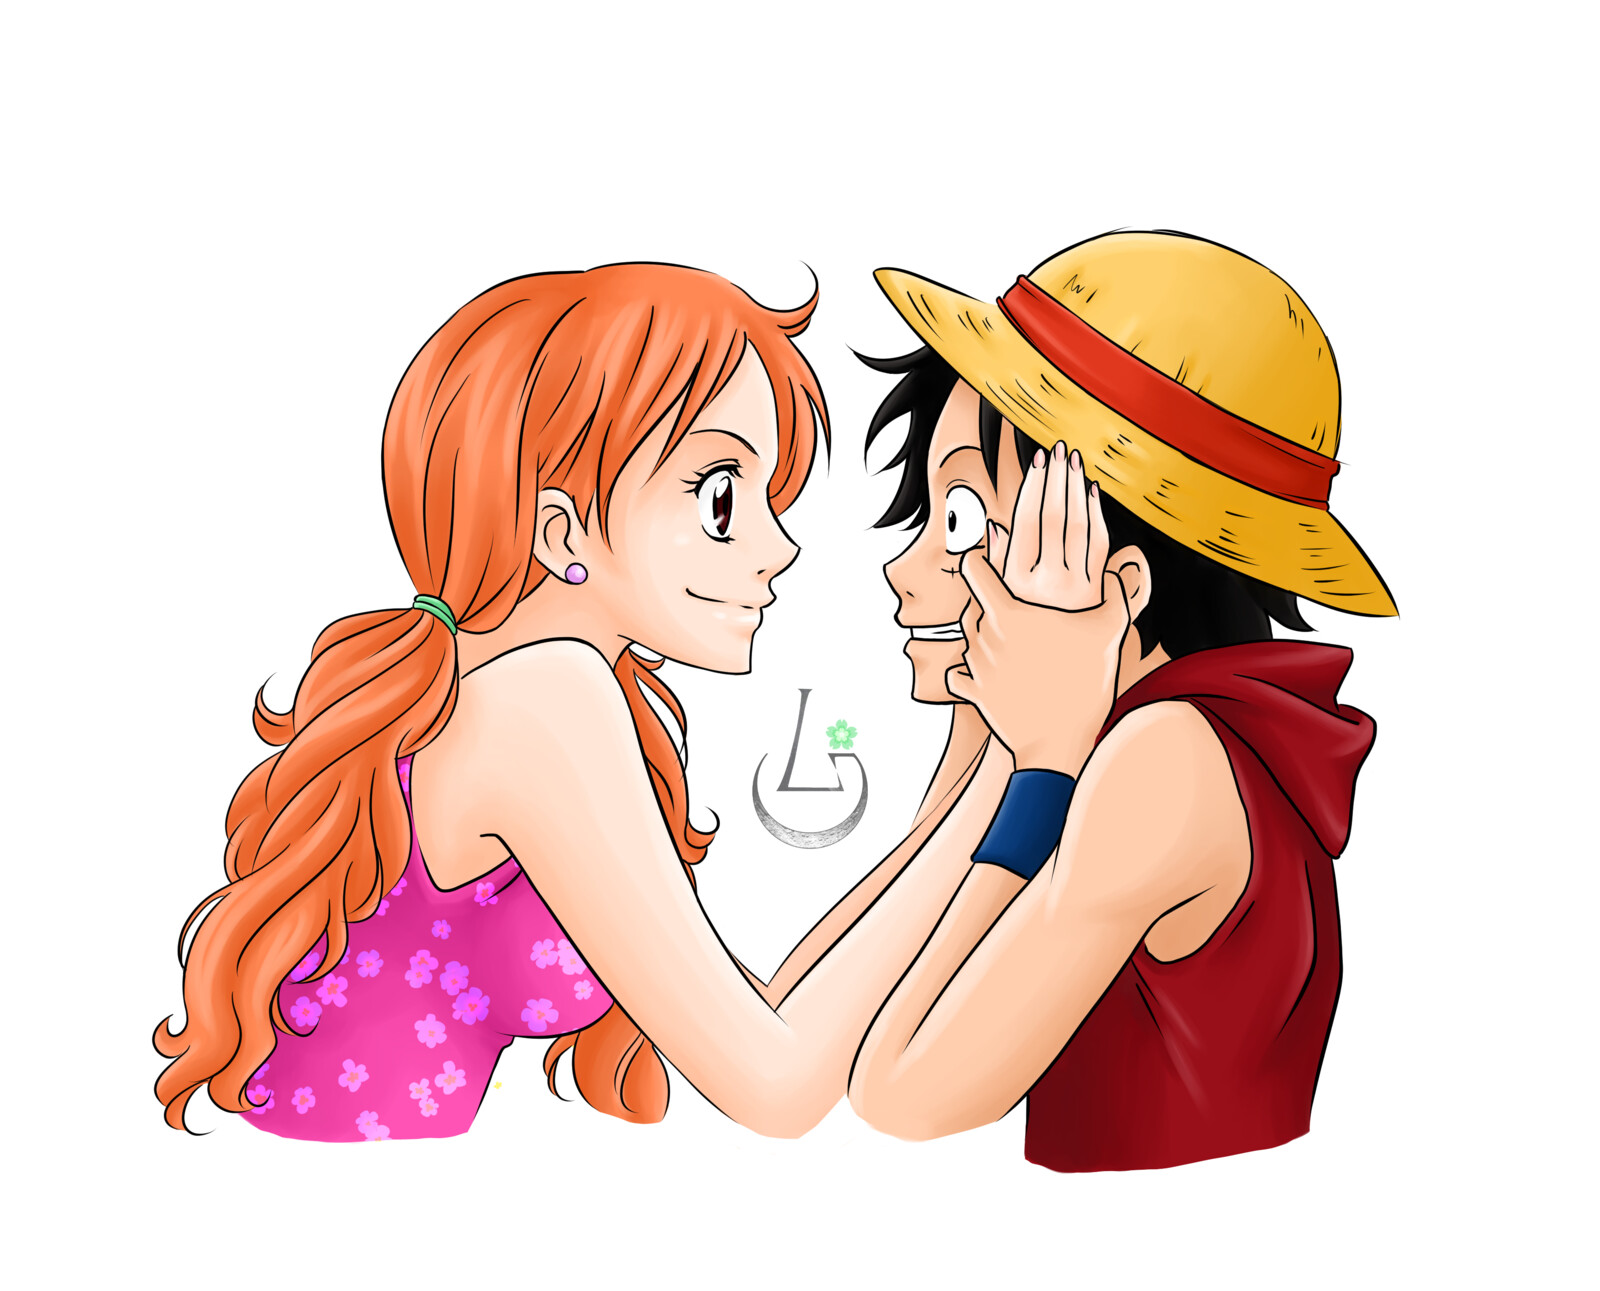 Nami & Luffy - Complicity.